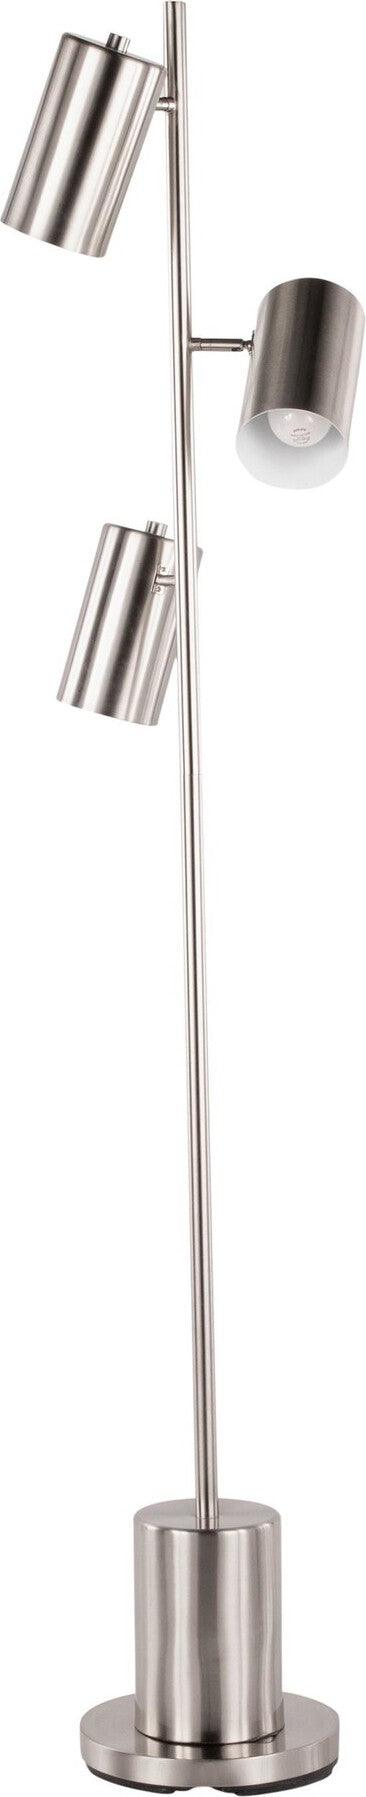 Lumisource Floor Lamps - Cannes Floor Lamp Brushed Stainless Steel